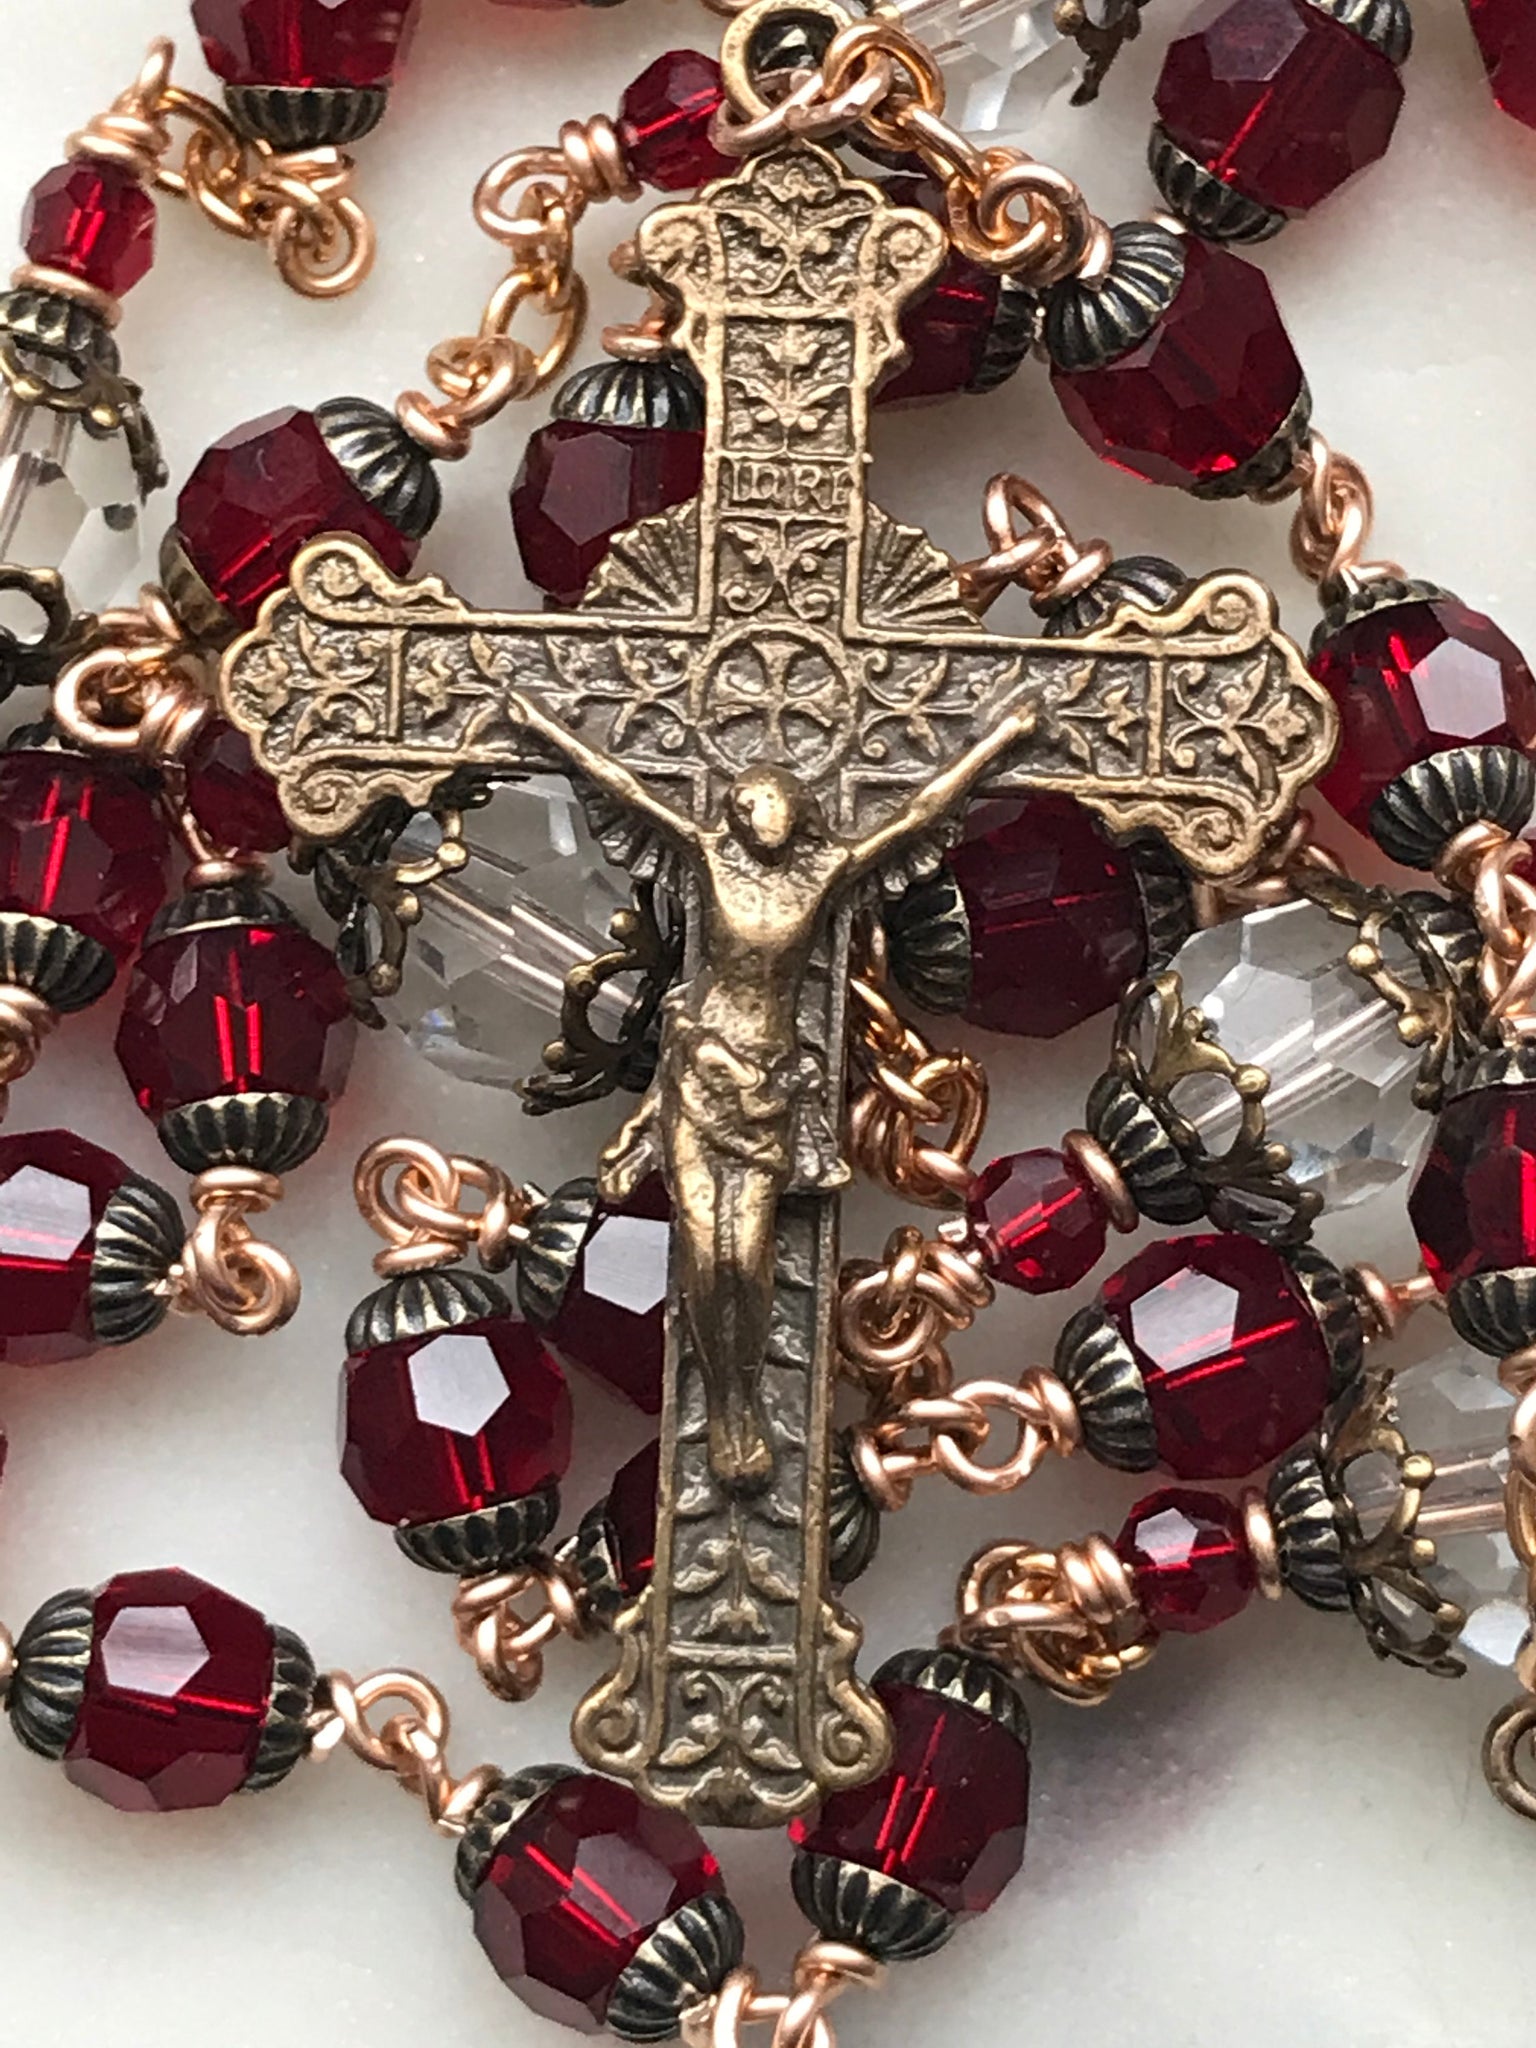 CHAPLET OF THE HOLY FACE - CROSS BEADS